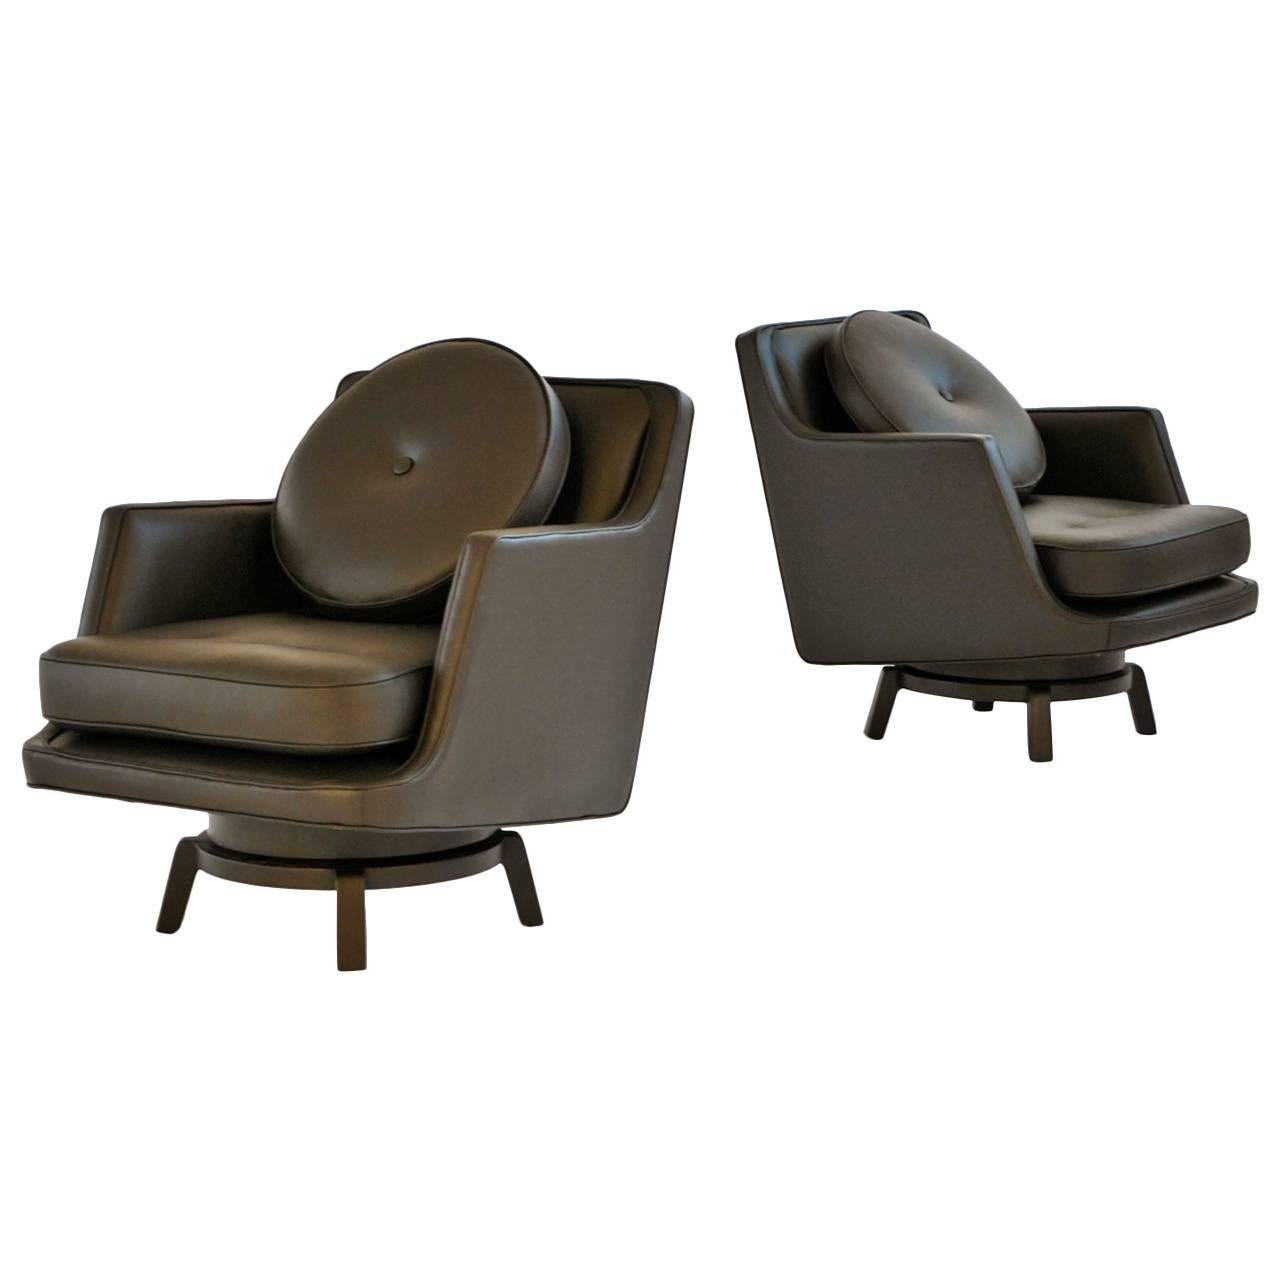 These beautiful Edward Wormley armchairs have been recovered in Spinneybeck chocolate brown leather. Dunbar model #5609.